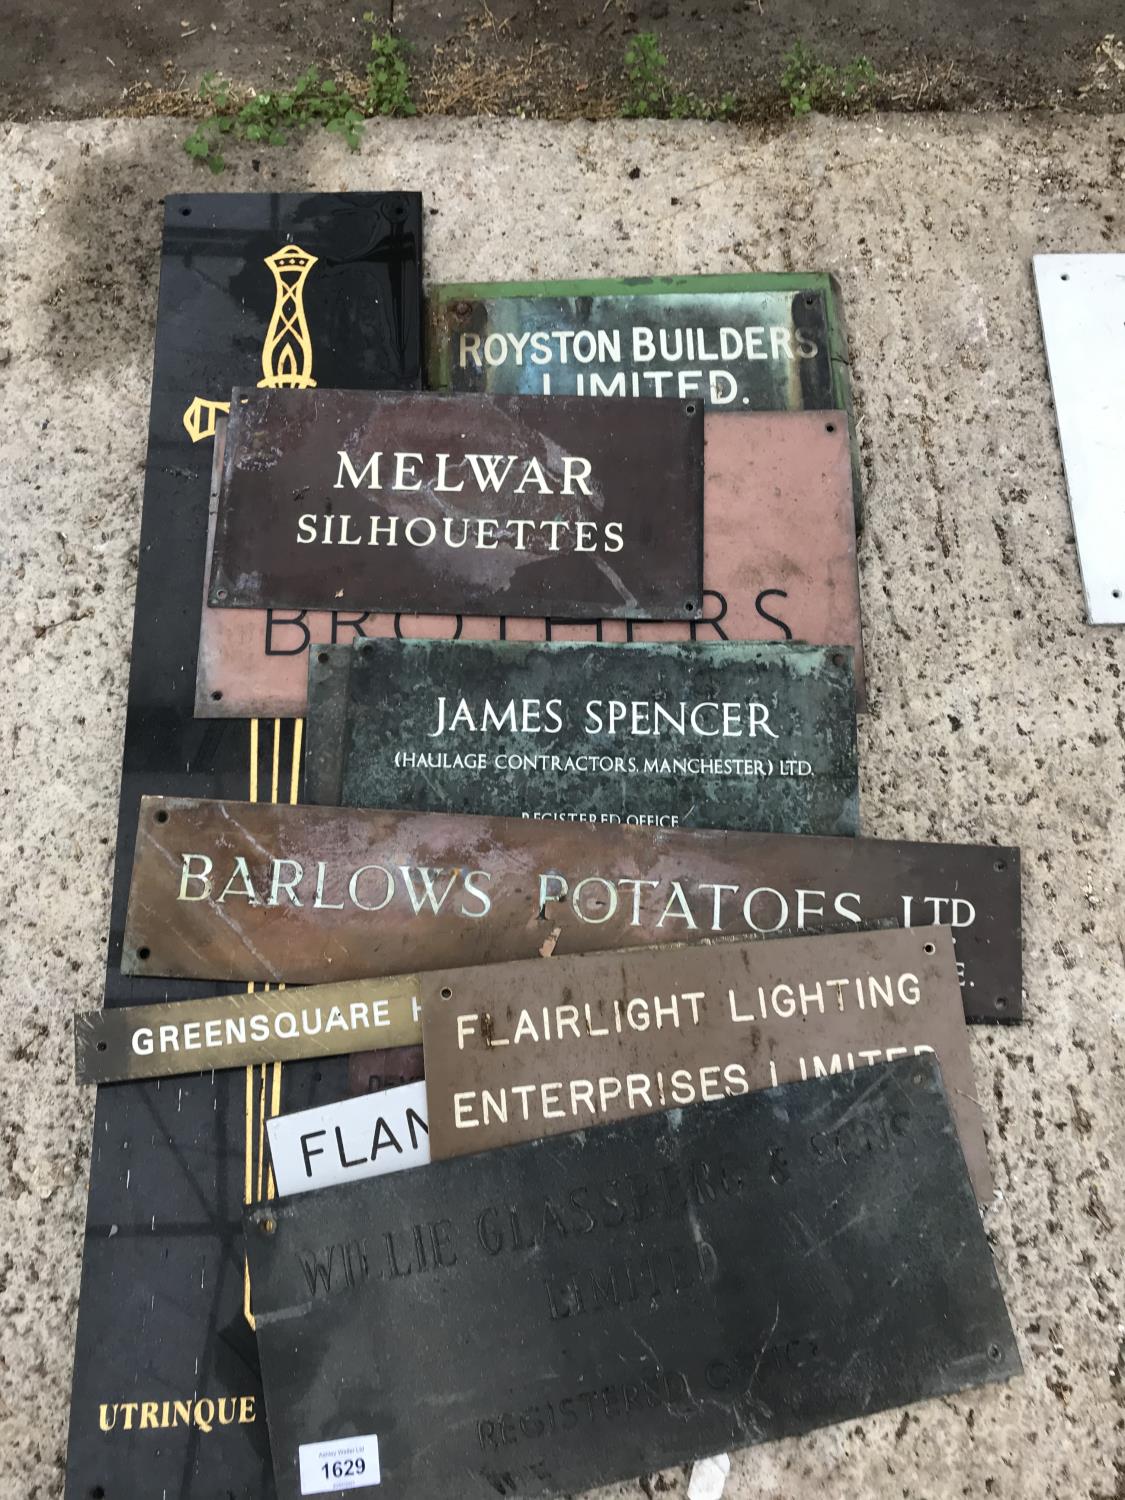 AN ASSORTMENT OF HISTORICAL METAL ENGRAVED COMPANY SIGNS